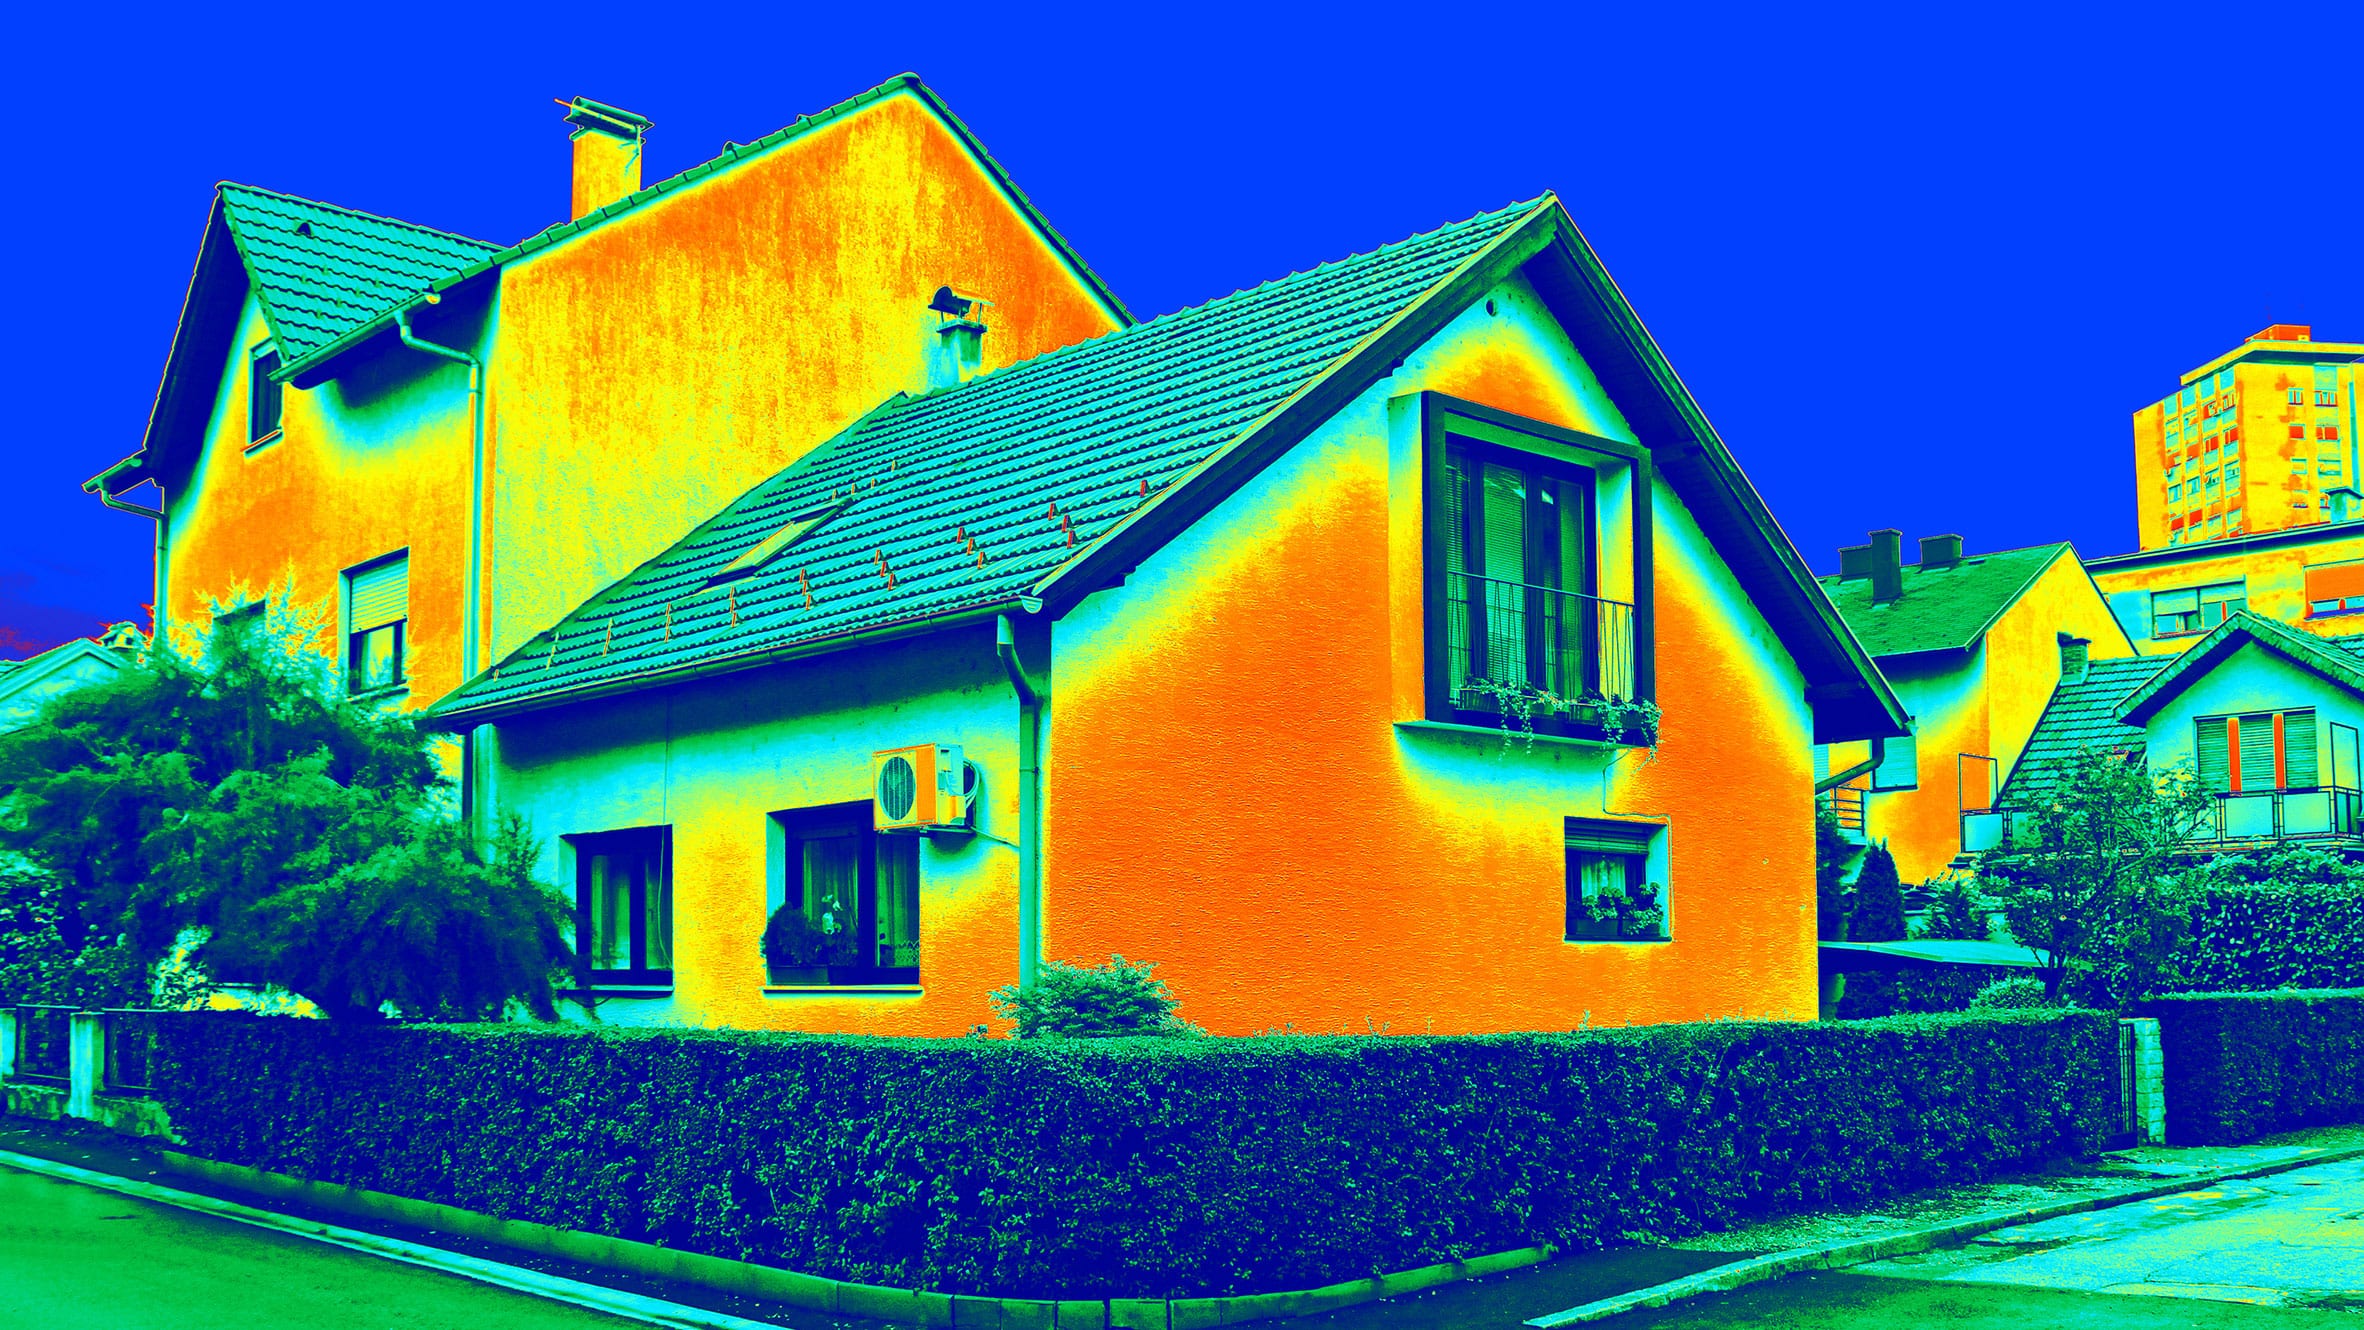 Thermal image of heat loss from house